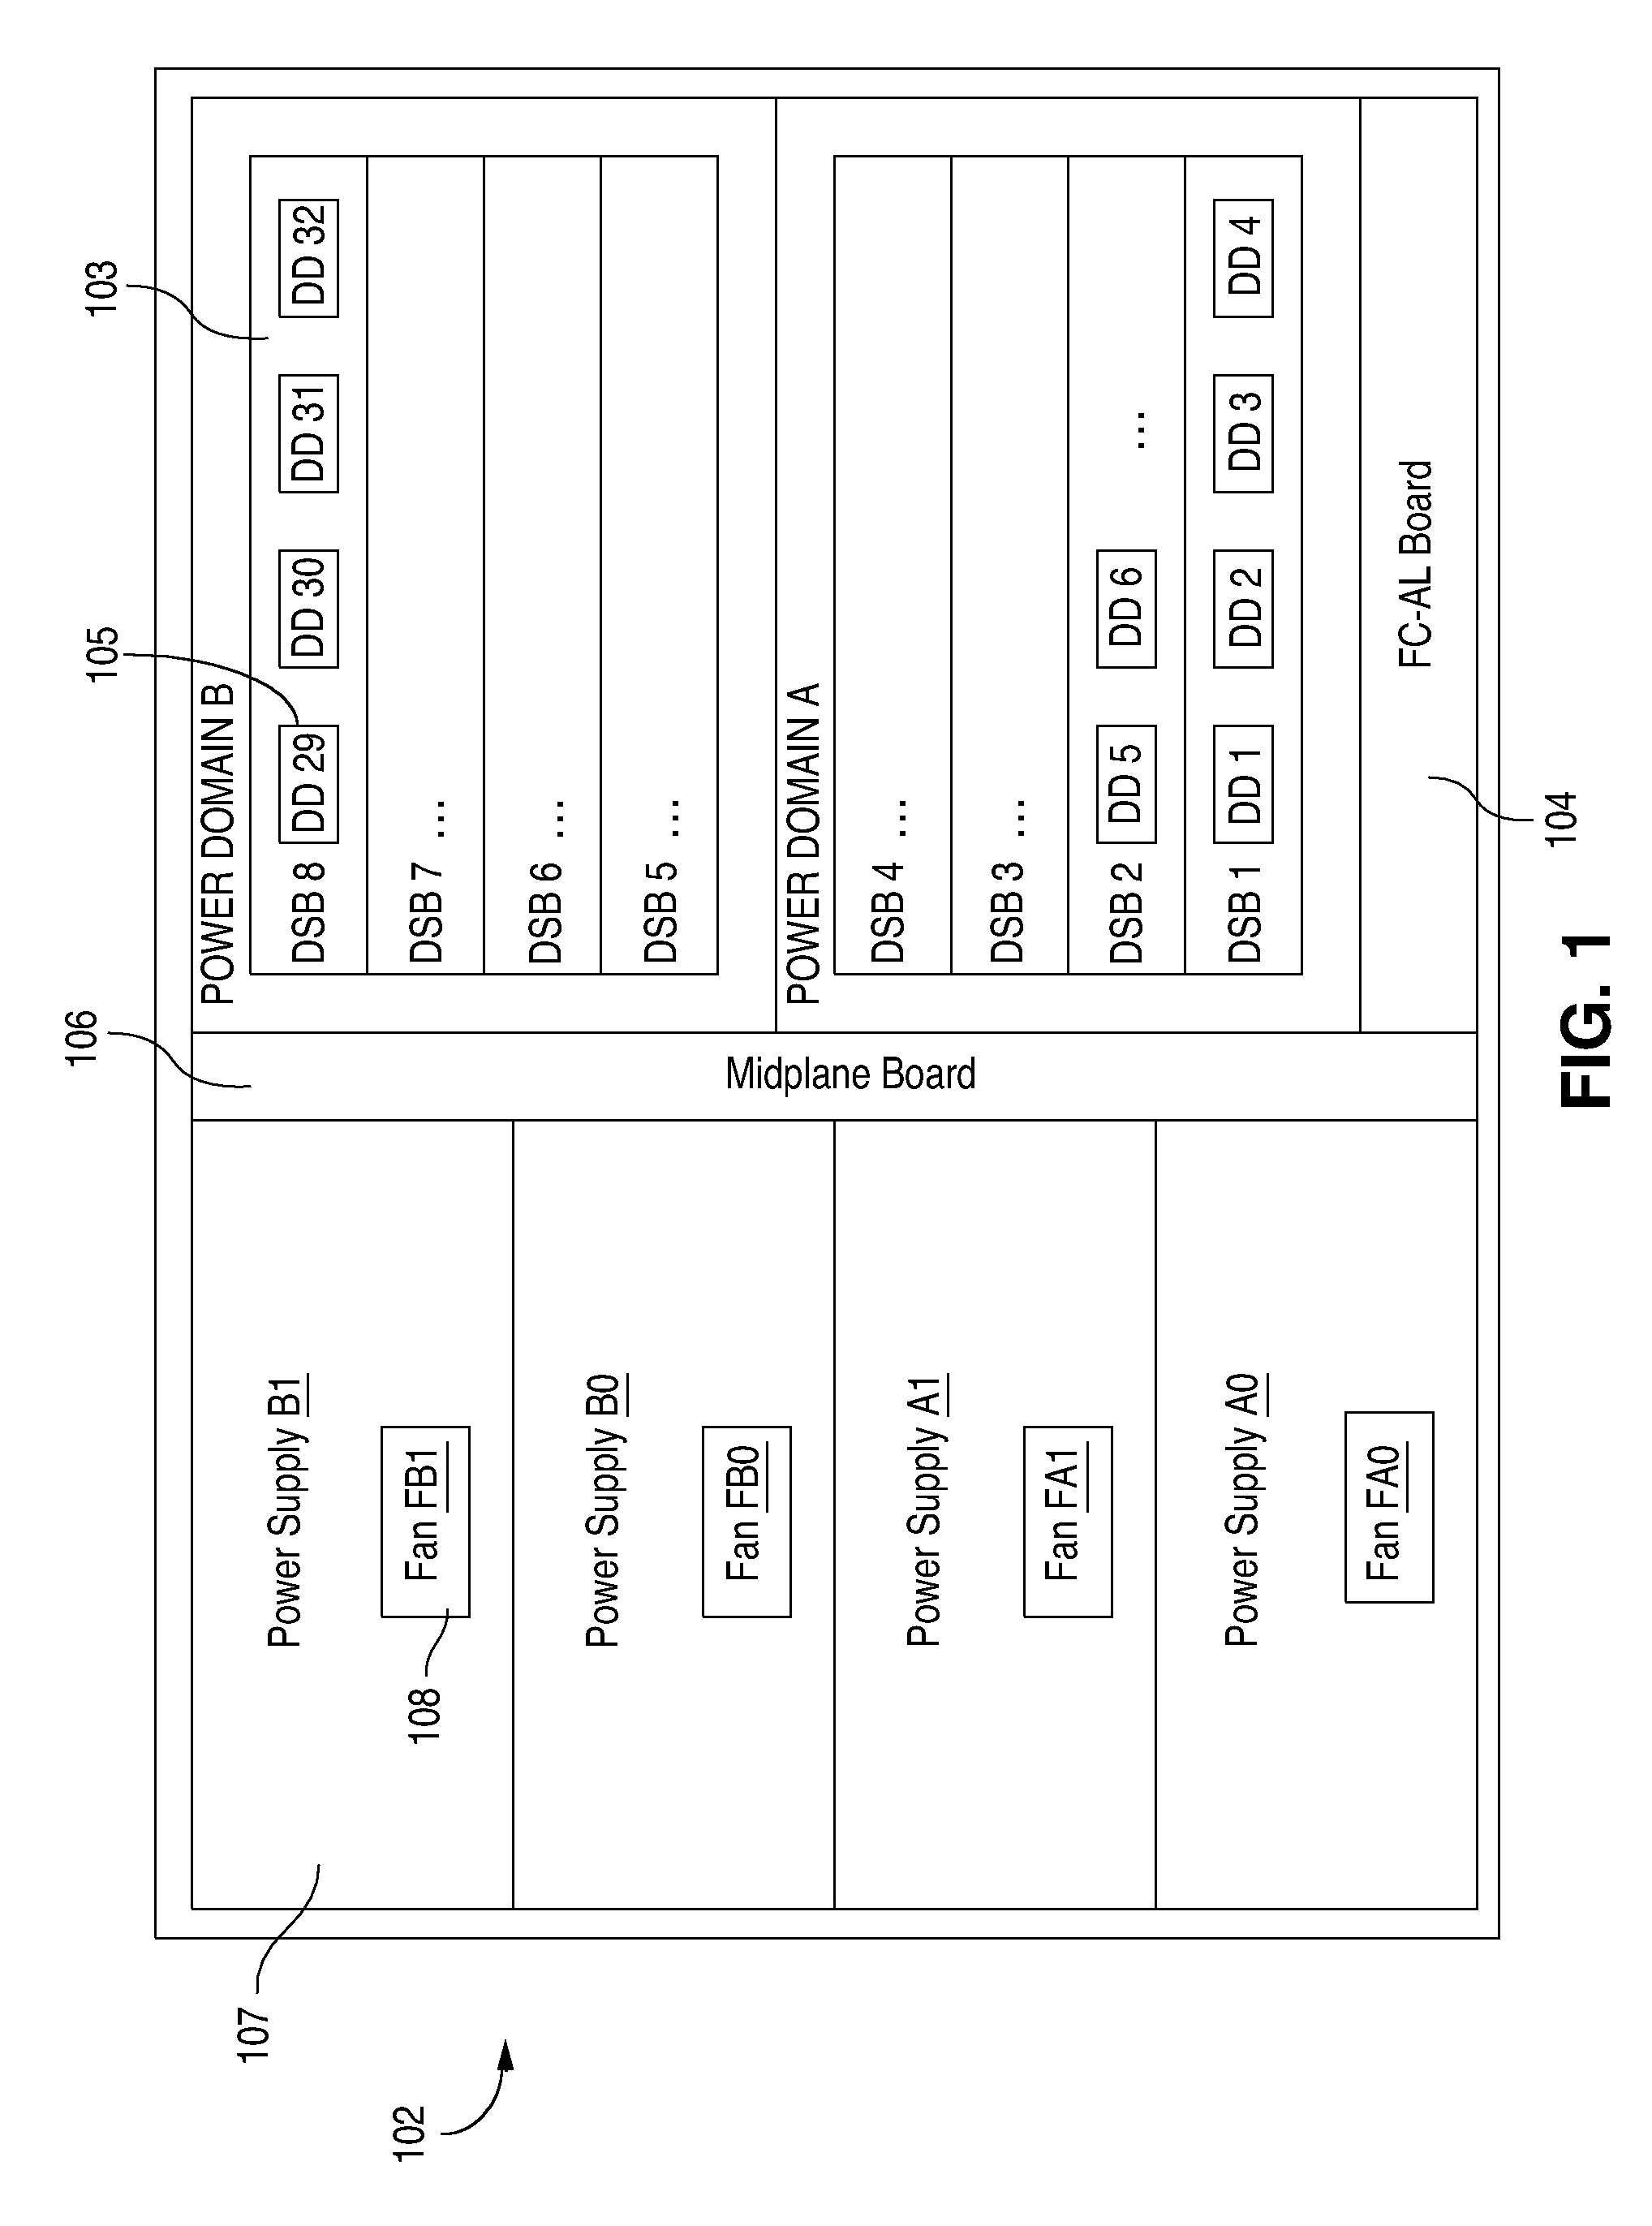 Isolation of I2C buses in a multiple power domain environment using switches